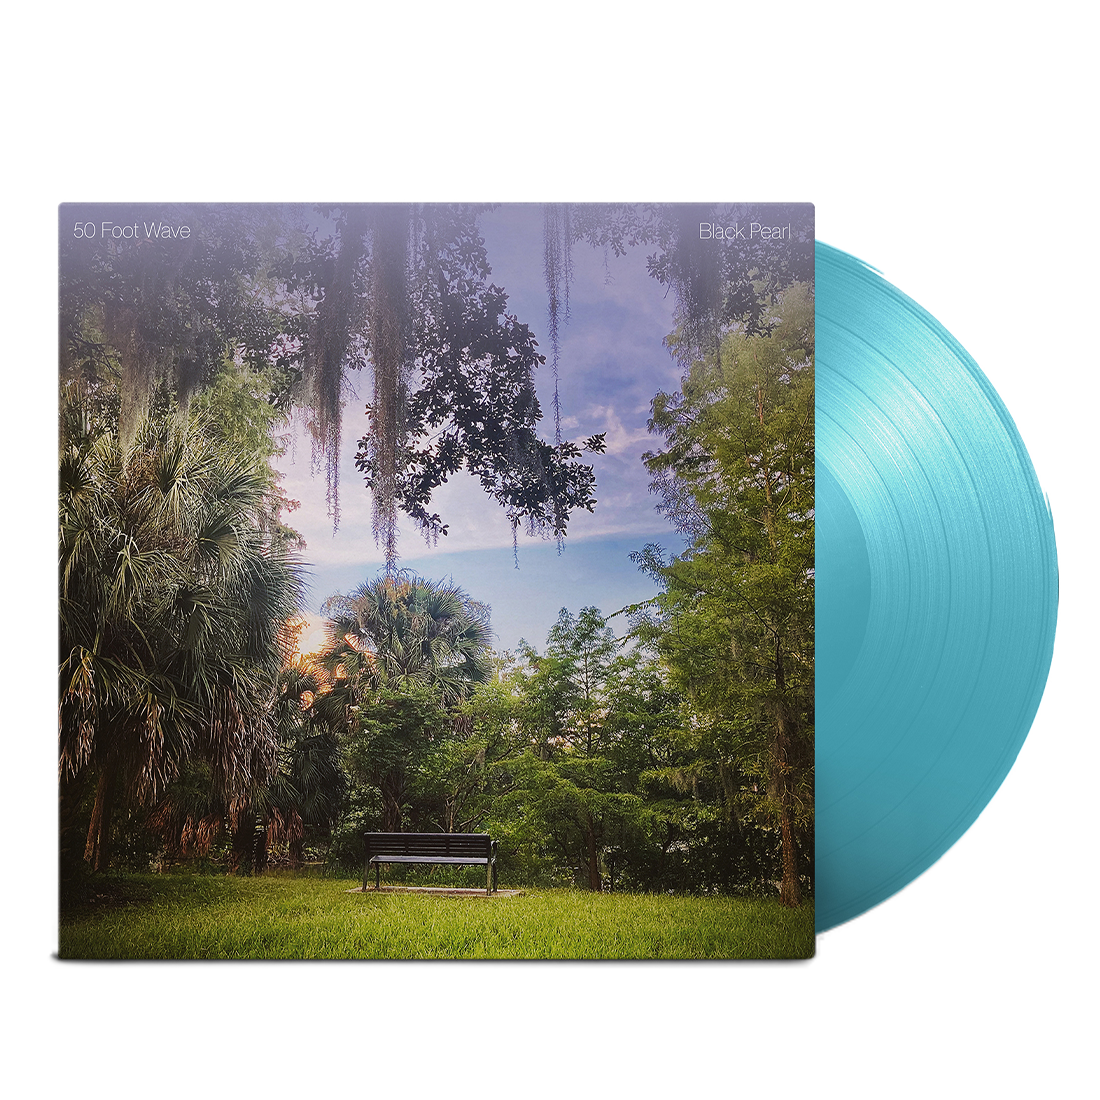 50 Foot Wave - Black Pearl: Limited Edition Turquoise Vinyl LP